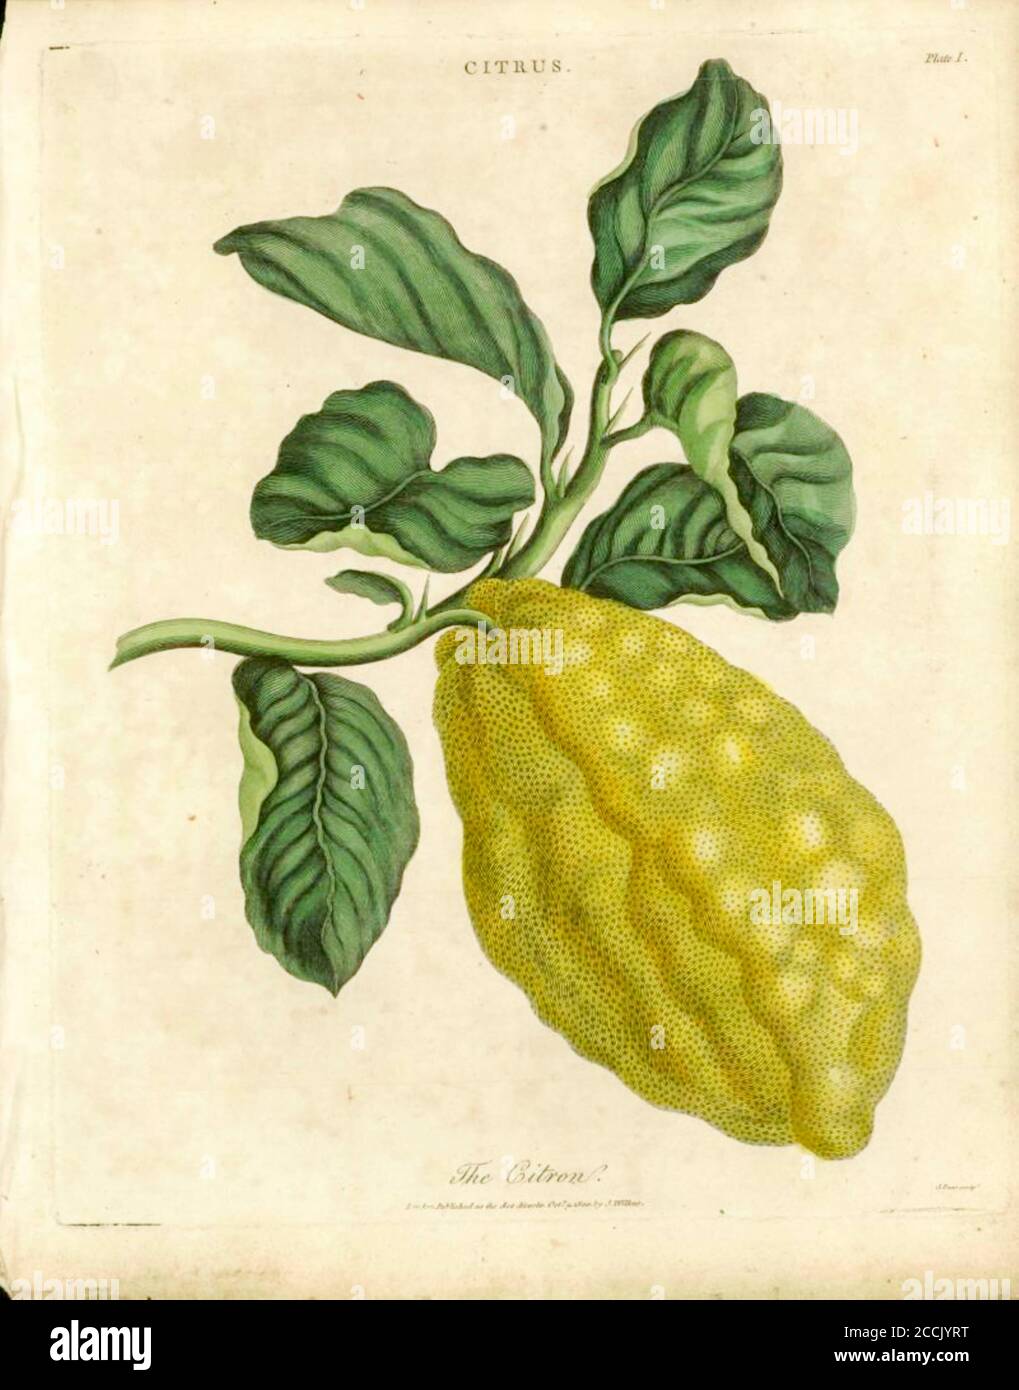 The citron (Citrus medica) is a large fragrant citrus fruit with a thick rind. It is one of the three original citrus fruits from which all other citrus types developed through natural hybrid speciation or artificial hybridization.[2] Though citron cultivars take on a wide variety of physical forms, they are all closely related genetically. It is used widely in Asian cuisine, and also in traditional medicines, perfume, and for religious rituals and offerings. Hybrids of citrons with other citrus are commercially prominent, notably lemons and many limes. Handcolored copperplate engraving From t Stock Photo